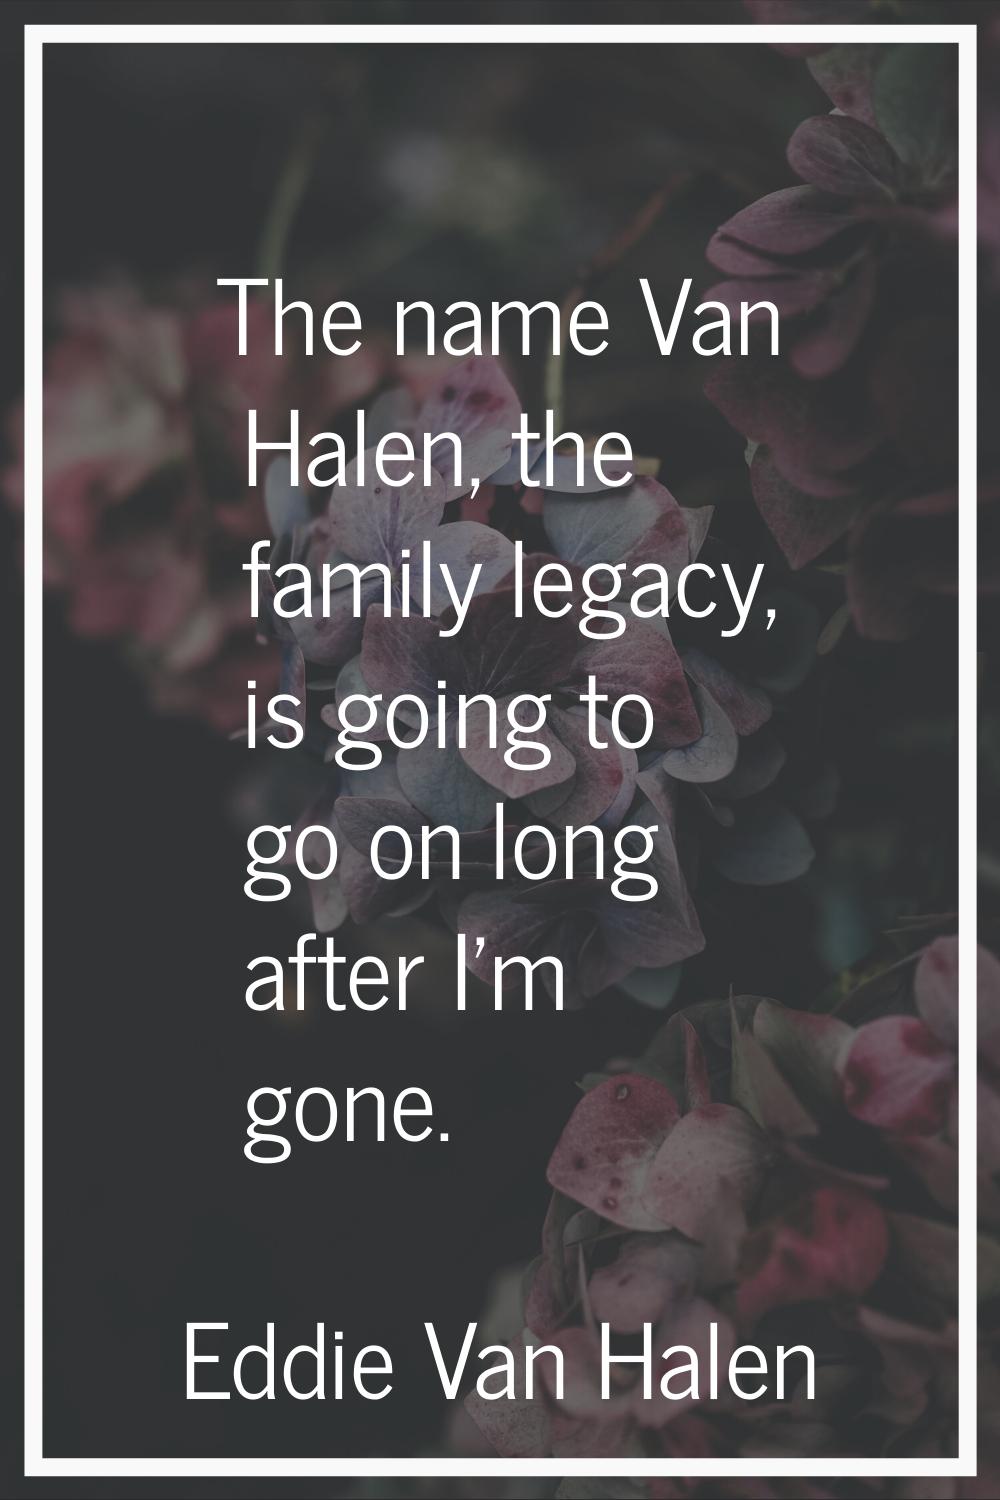 The name Van Halen, the family legacy, is going to go on long after I'm gone.